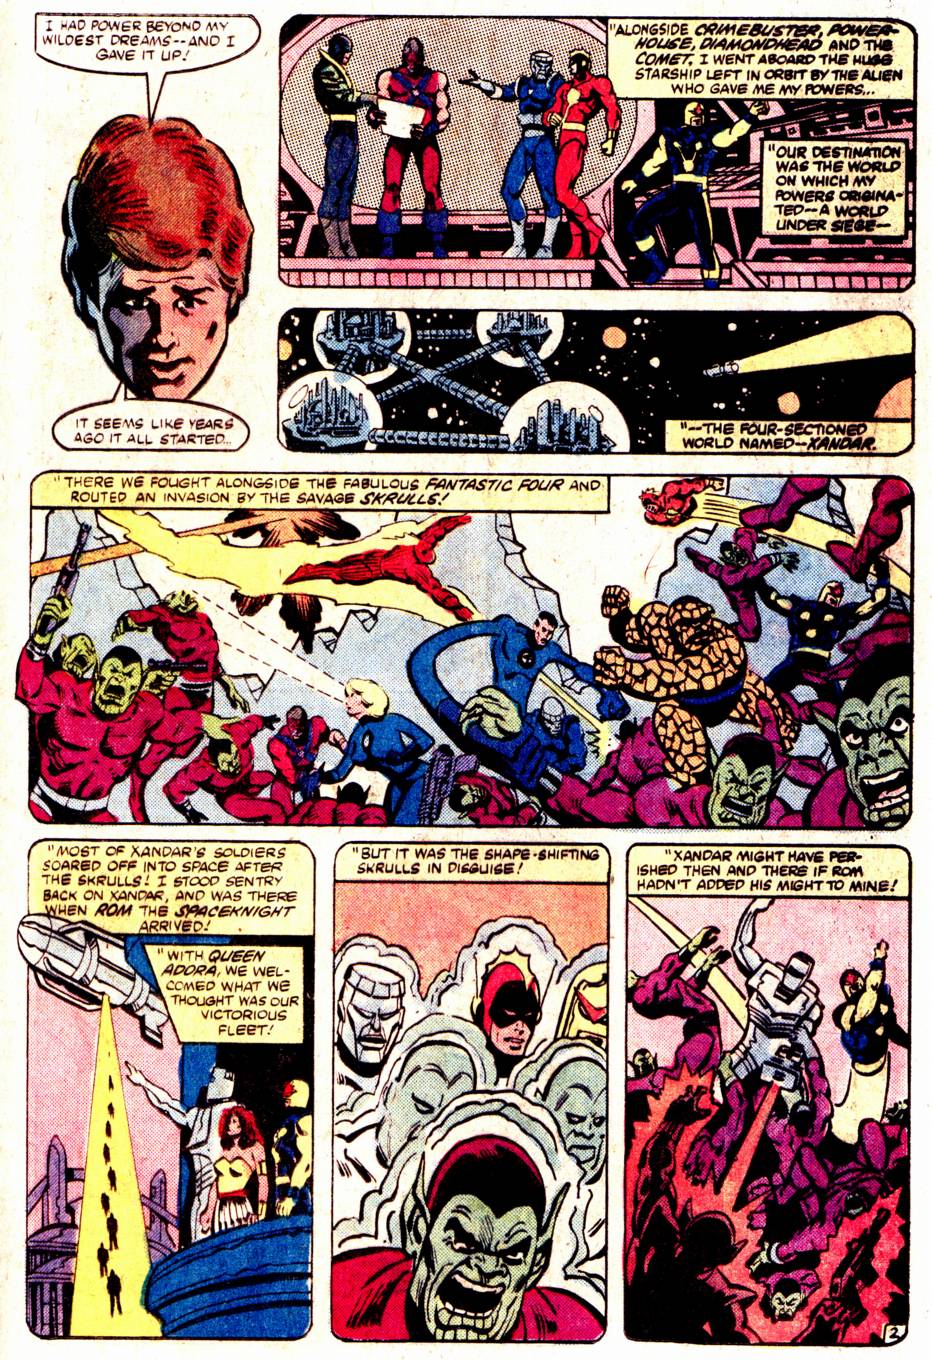 What If? (1977) issue 36 - The Fantastic Four Had Not Gained Their Powers - Page 23